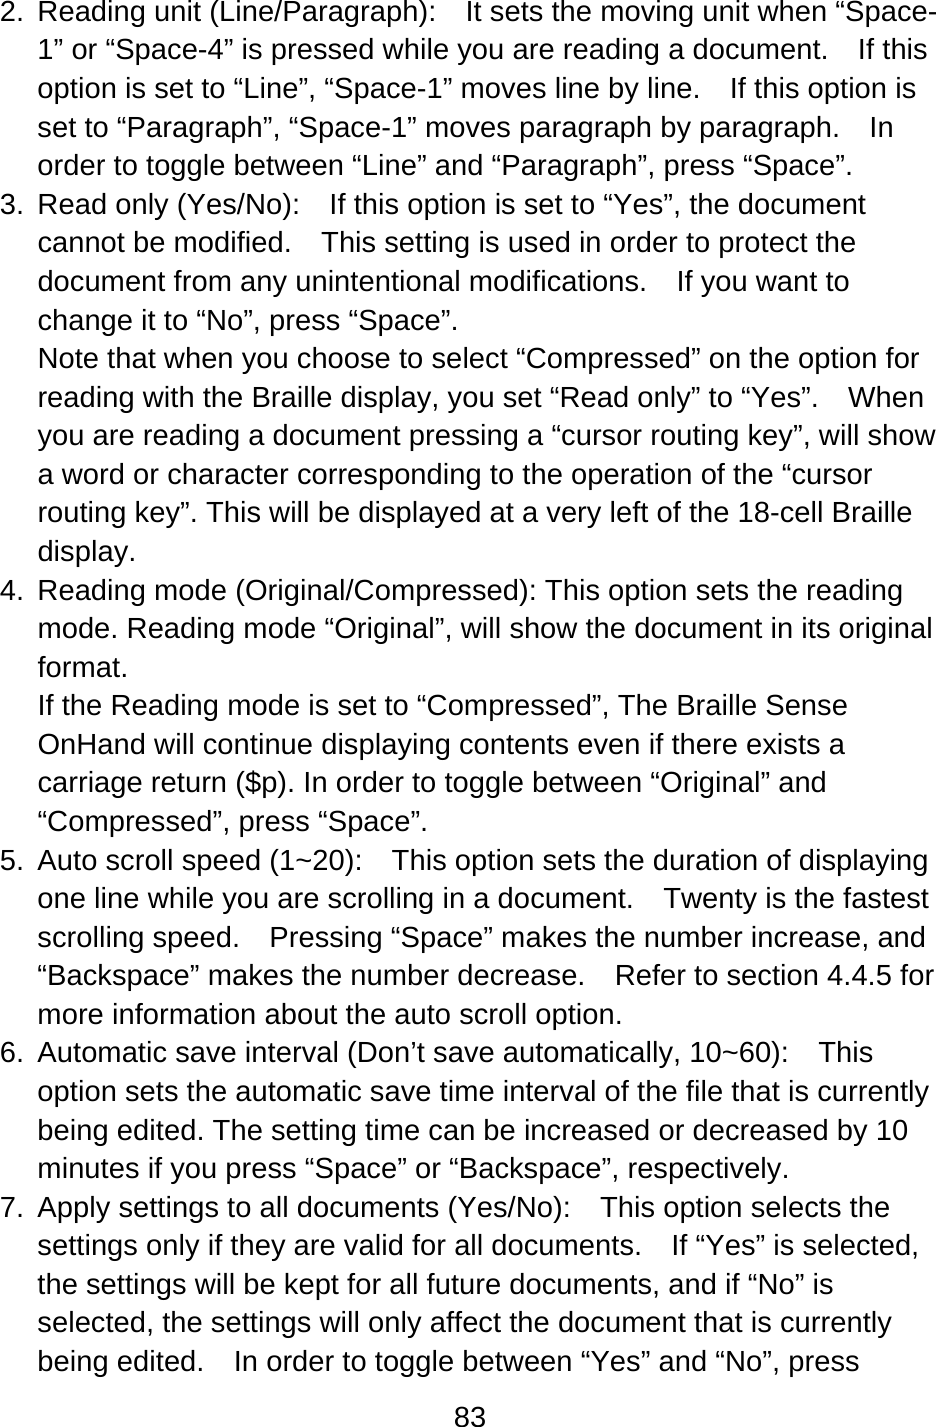 83  2. Reading unit (Line/Paragraph):  It sets the moving unit when “Space-1” or “Space-4” is pressed while you are reading a document.    If this option is set to “Line”, “Space-1” moves line by line.    If this option is set to “Paragraph”, “Space-1” moves paragraph by paragraph.  In order to toggle between “Line” and “Paragraph”, press “Space”. 3.  Read only (Yes/No):    If this option is set to “Yes”, the document cannot be modified.    This setting is used in order to protect the document from any unintentional modifications.  If you want to change it to “No”, press “Space”. Note that when you choose to select “Compressed” on the option for reading with the Braille display, you set “Read only” to “Yes”.    When you are reading a document pressing a “cursor routing key”, will show a word or character corresponding to the operation of the “cursor routing key”. This will be displayed at a very left of the 18-cell Braille display. 4. Reading mode (Original/Compressed): This option sets the reading mode. Reading mode “Original”, will show the document in its original format. If the Reading mode is set to “Compressed”, The Braille Sense OnHand will continue displaying contents even if there exists a carriage return ($p). In order to toggle between “Original” and “Compressed”, press “Space”. 5.  Auto scroll speed (1~20):    This option sets the duration of displaying one line while you are scrolling in a document.    Twenty is the fastest scrolling speed.    Pressing “Space” makes the number increase, and “Backspace” makes the number decrease.    Refer to section 4.4.5 for more information about the auto scroll option. 6.  Automatic save interval (Don’t save automatically, 10~60):    This option sets the automatic save time interval of the file that is currently being edited. The setting time can be increased or decreased by 10 minutes if you press “Space” or “Backspace”, respectively. 7.  Apply settings to all documents (Yes/No):    This option selects the settings only if they are valid for all documents.    If “Yes” is selected, the settings will be kept for all future documents, and if “No” is selected, the settings will only affect the document that is currently being edited.    In order to toggle between “Yes” and “No”, press 